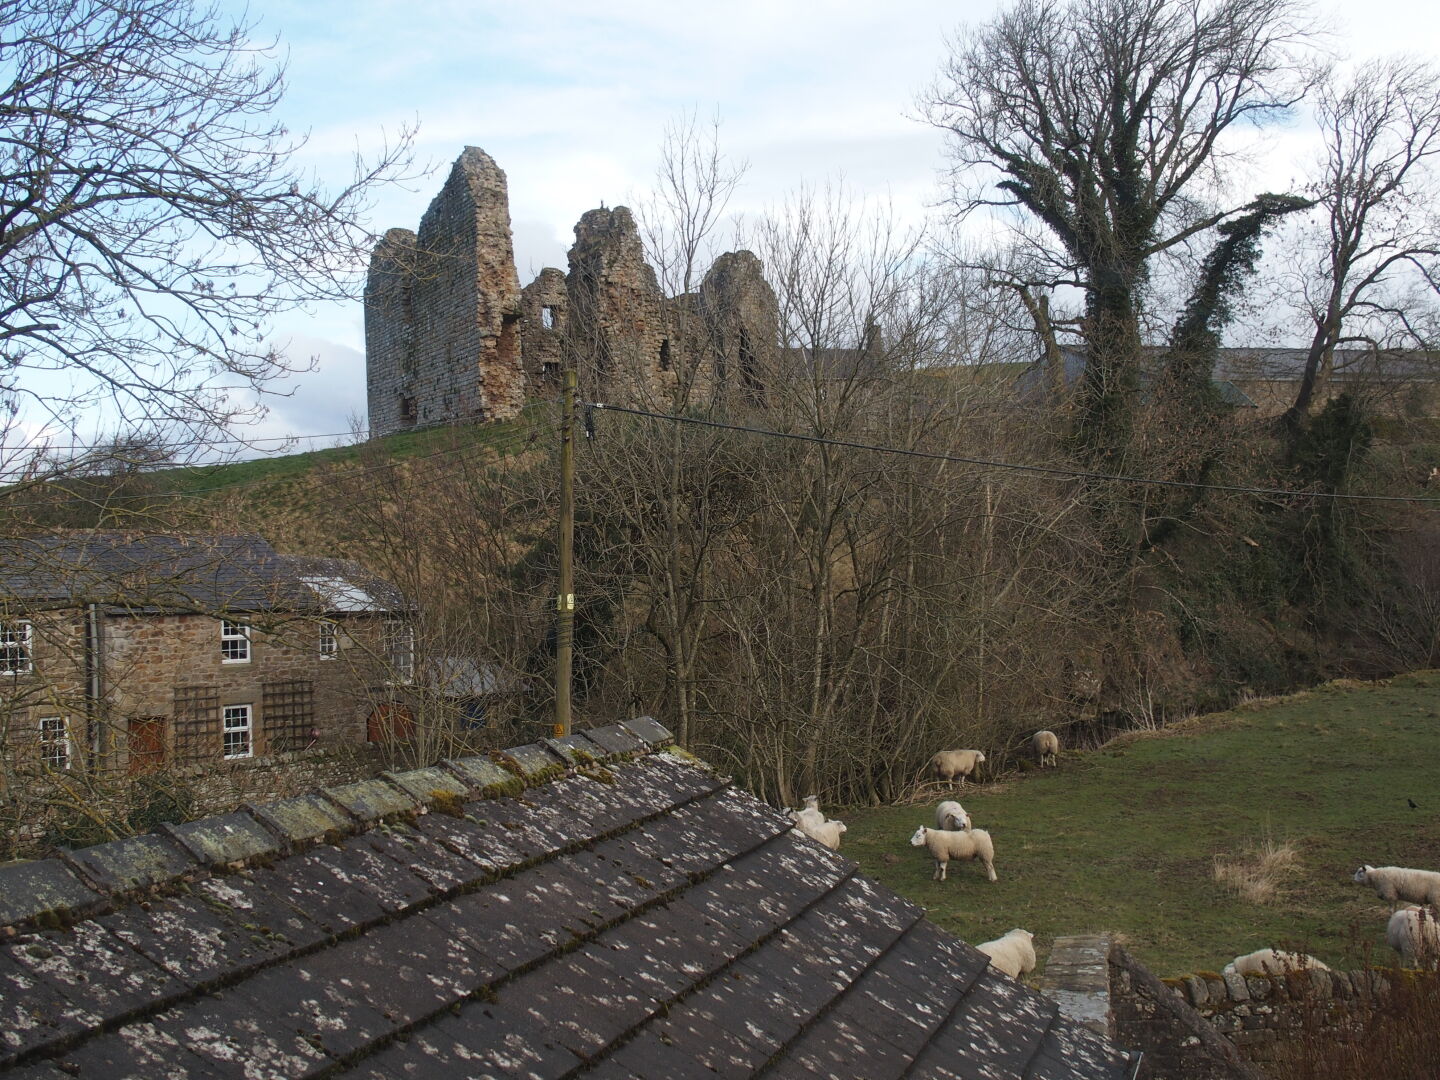 Our room in Holmhead guest house, and the view from the lounge: Thirlwall castle and sheep.